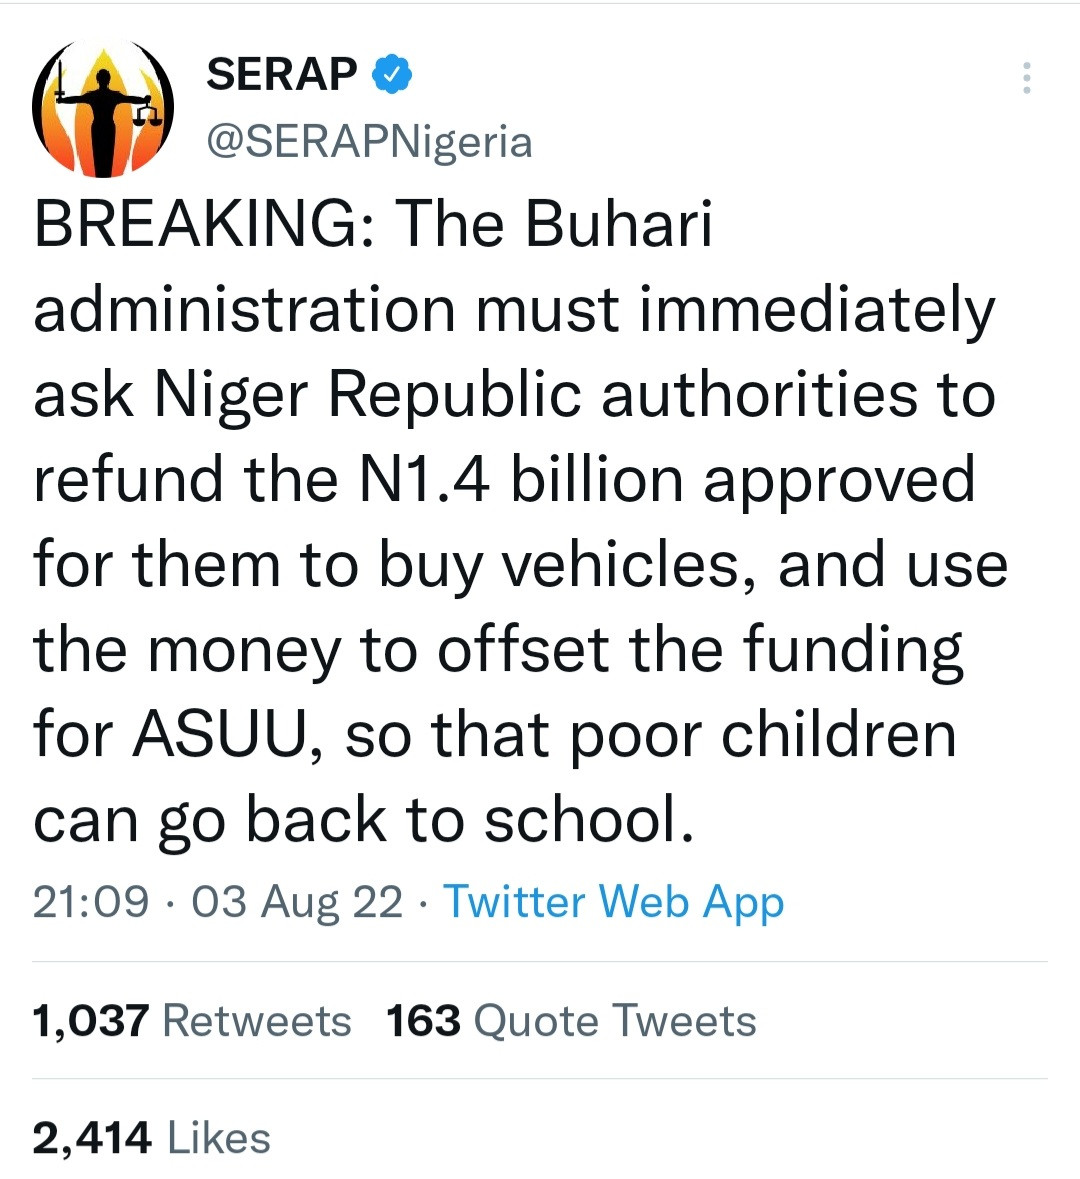 Ask Niger Republic to immediately refund N1.4 billion and use it to offset ASUU funding - SERAP tells Buhari administration 